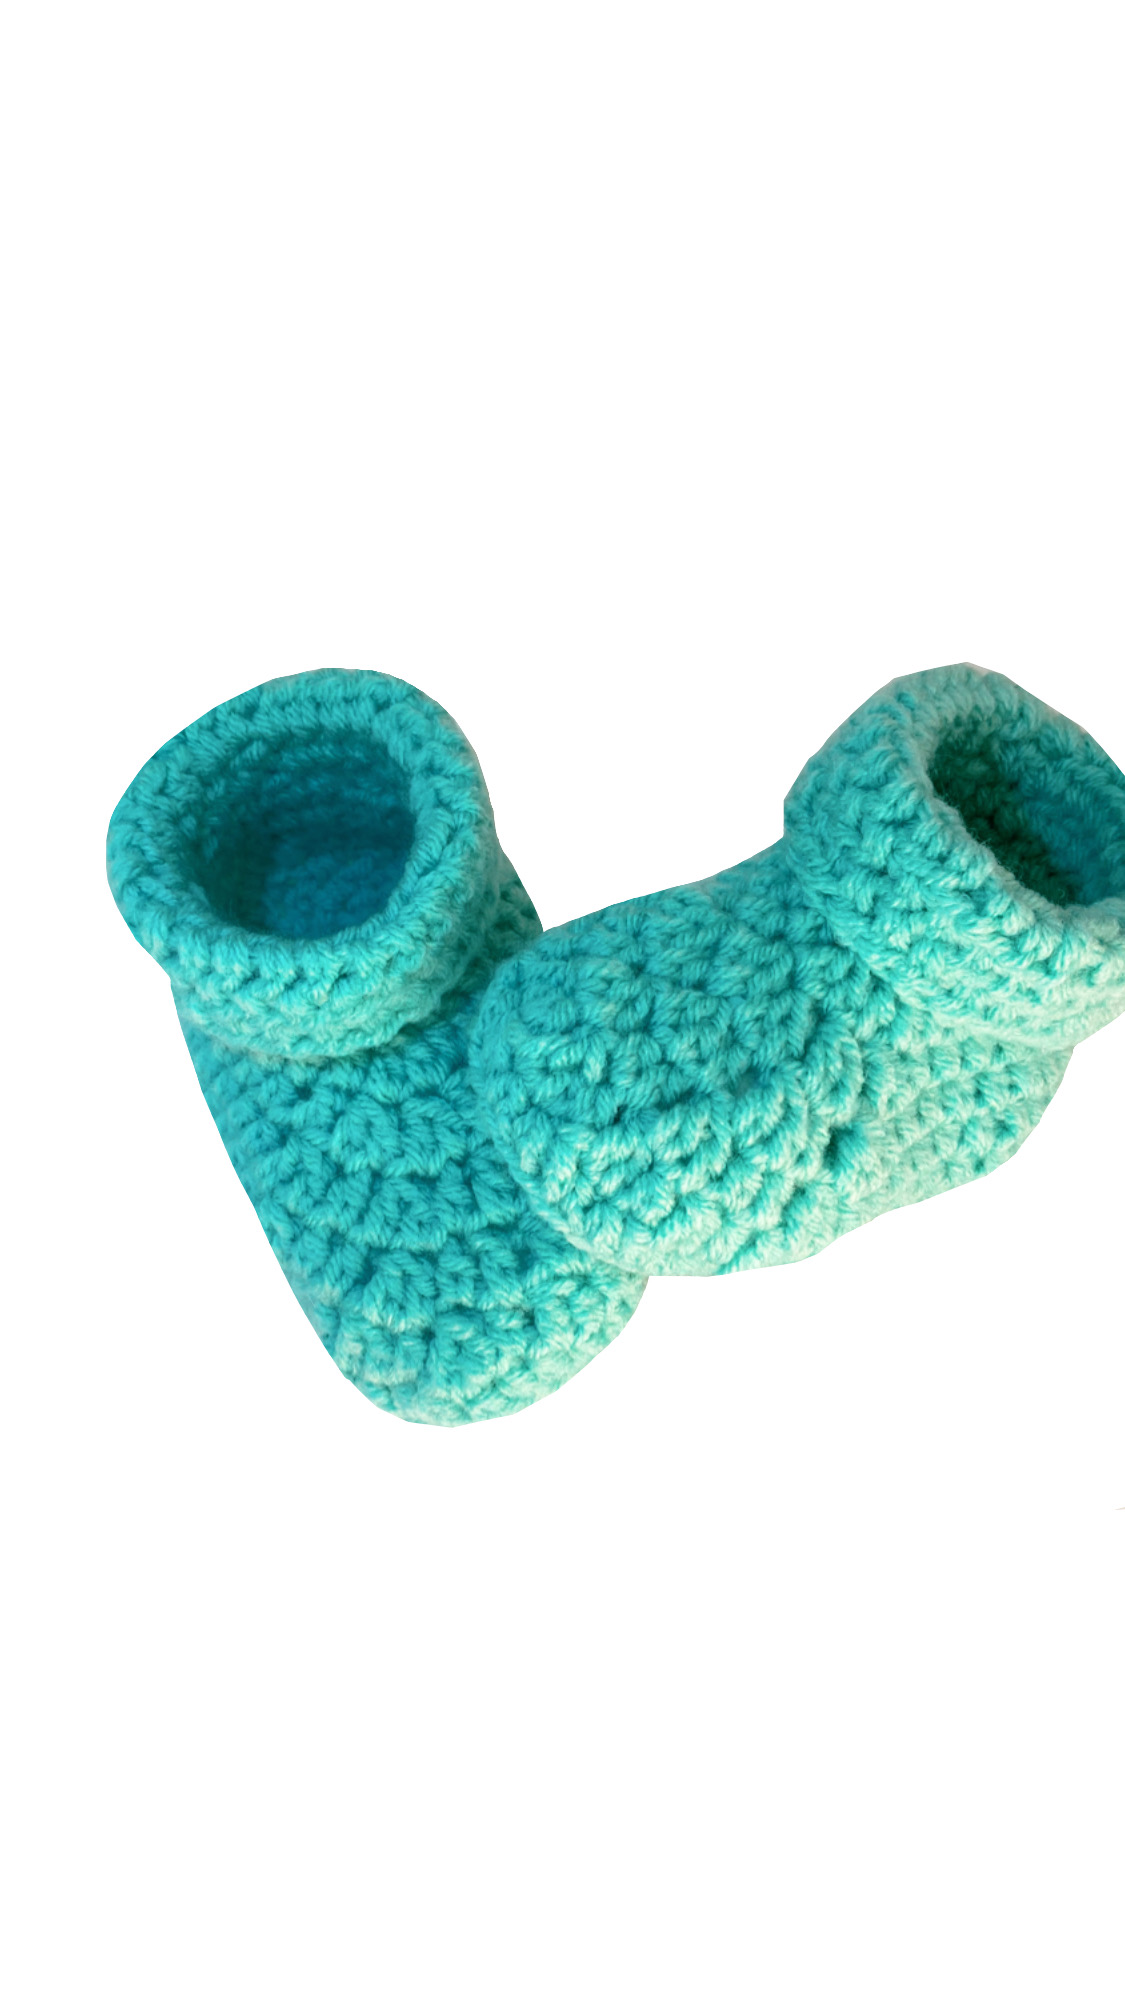 Pikkaboo Cuddles and Snuggles Crochet Baby Booties - Green